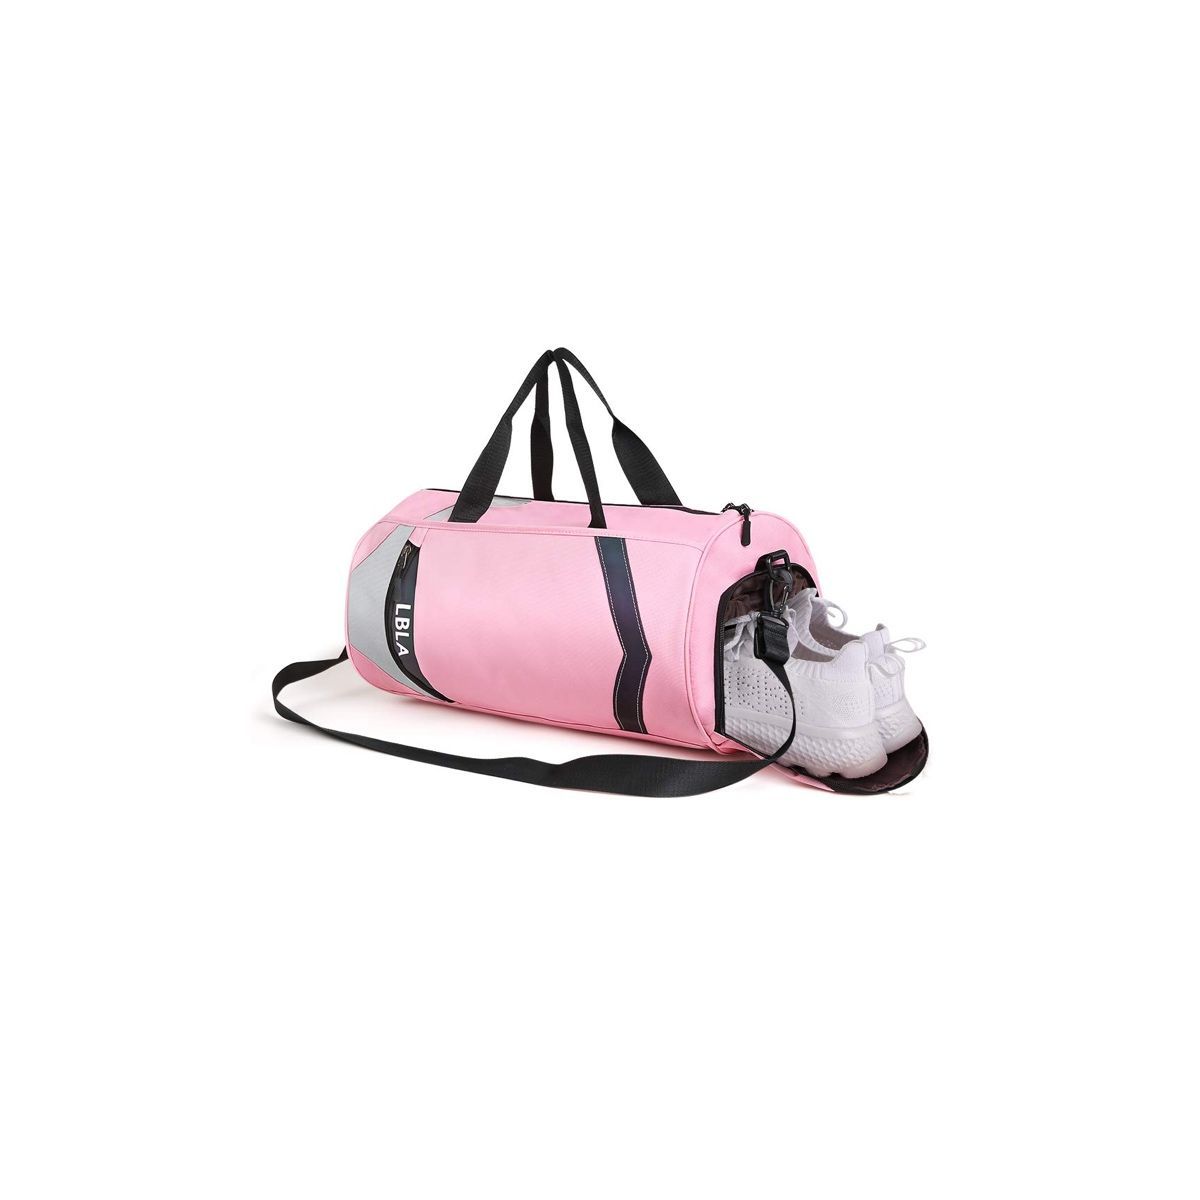 Pink Sport Gym Bag Large Travel Duffel Bag with Shoe Compartment Wet Pocket